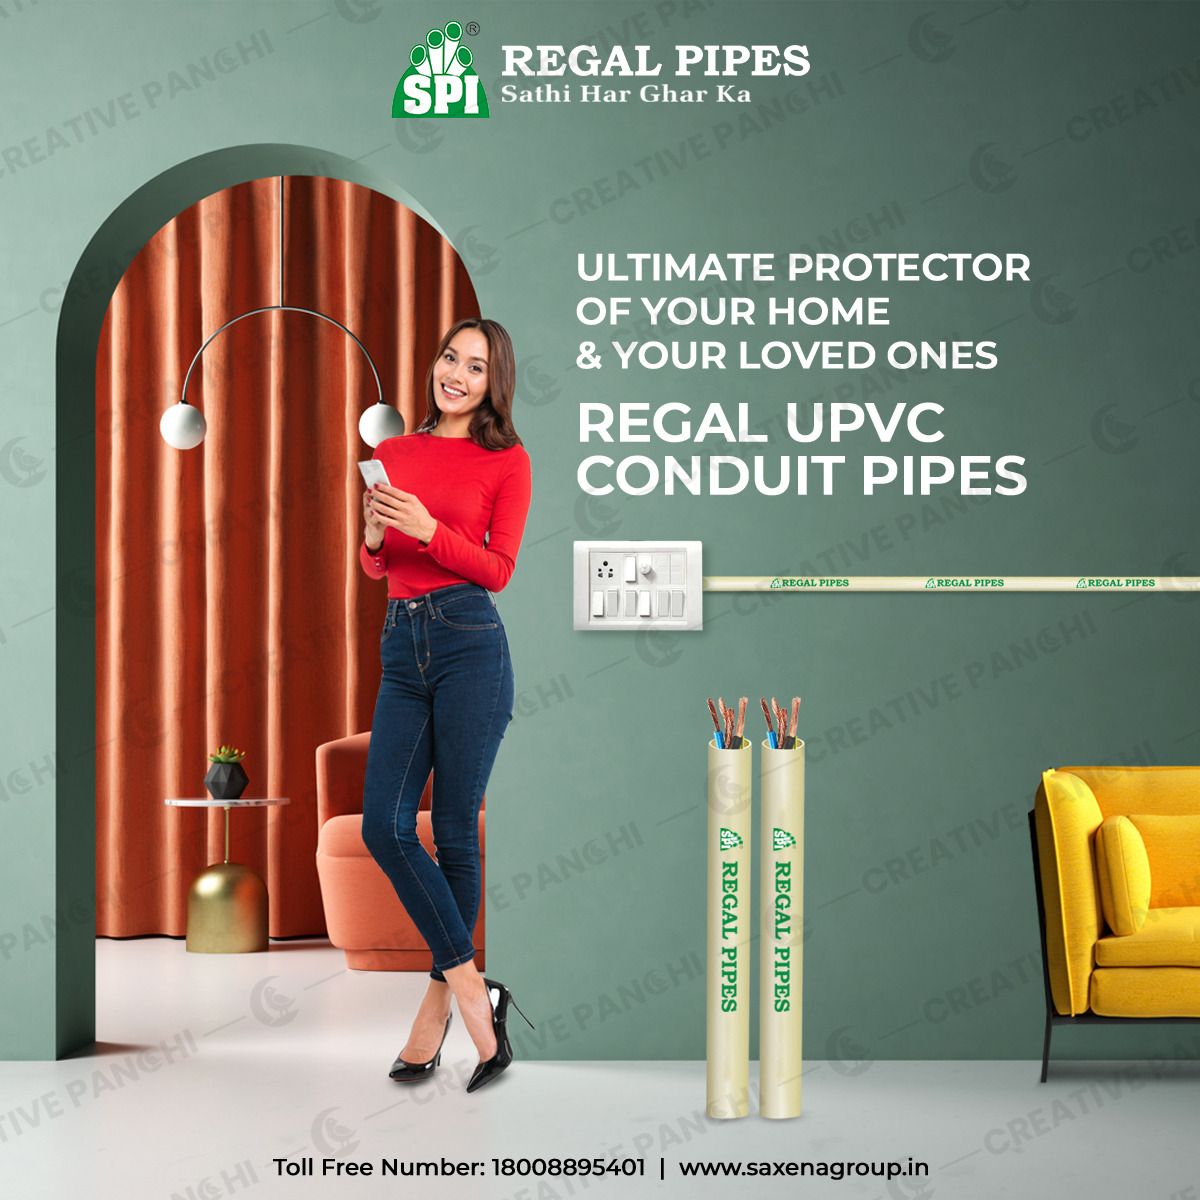 Think quality! Think Regal Pipes